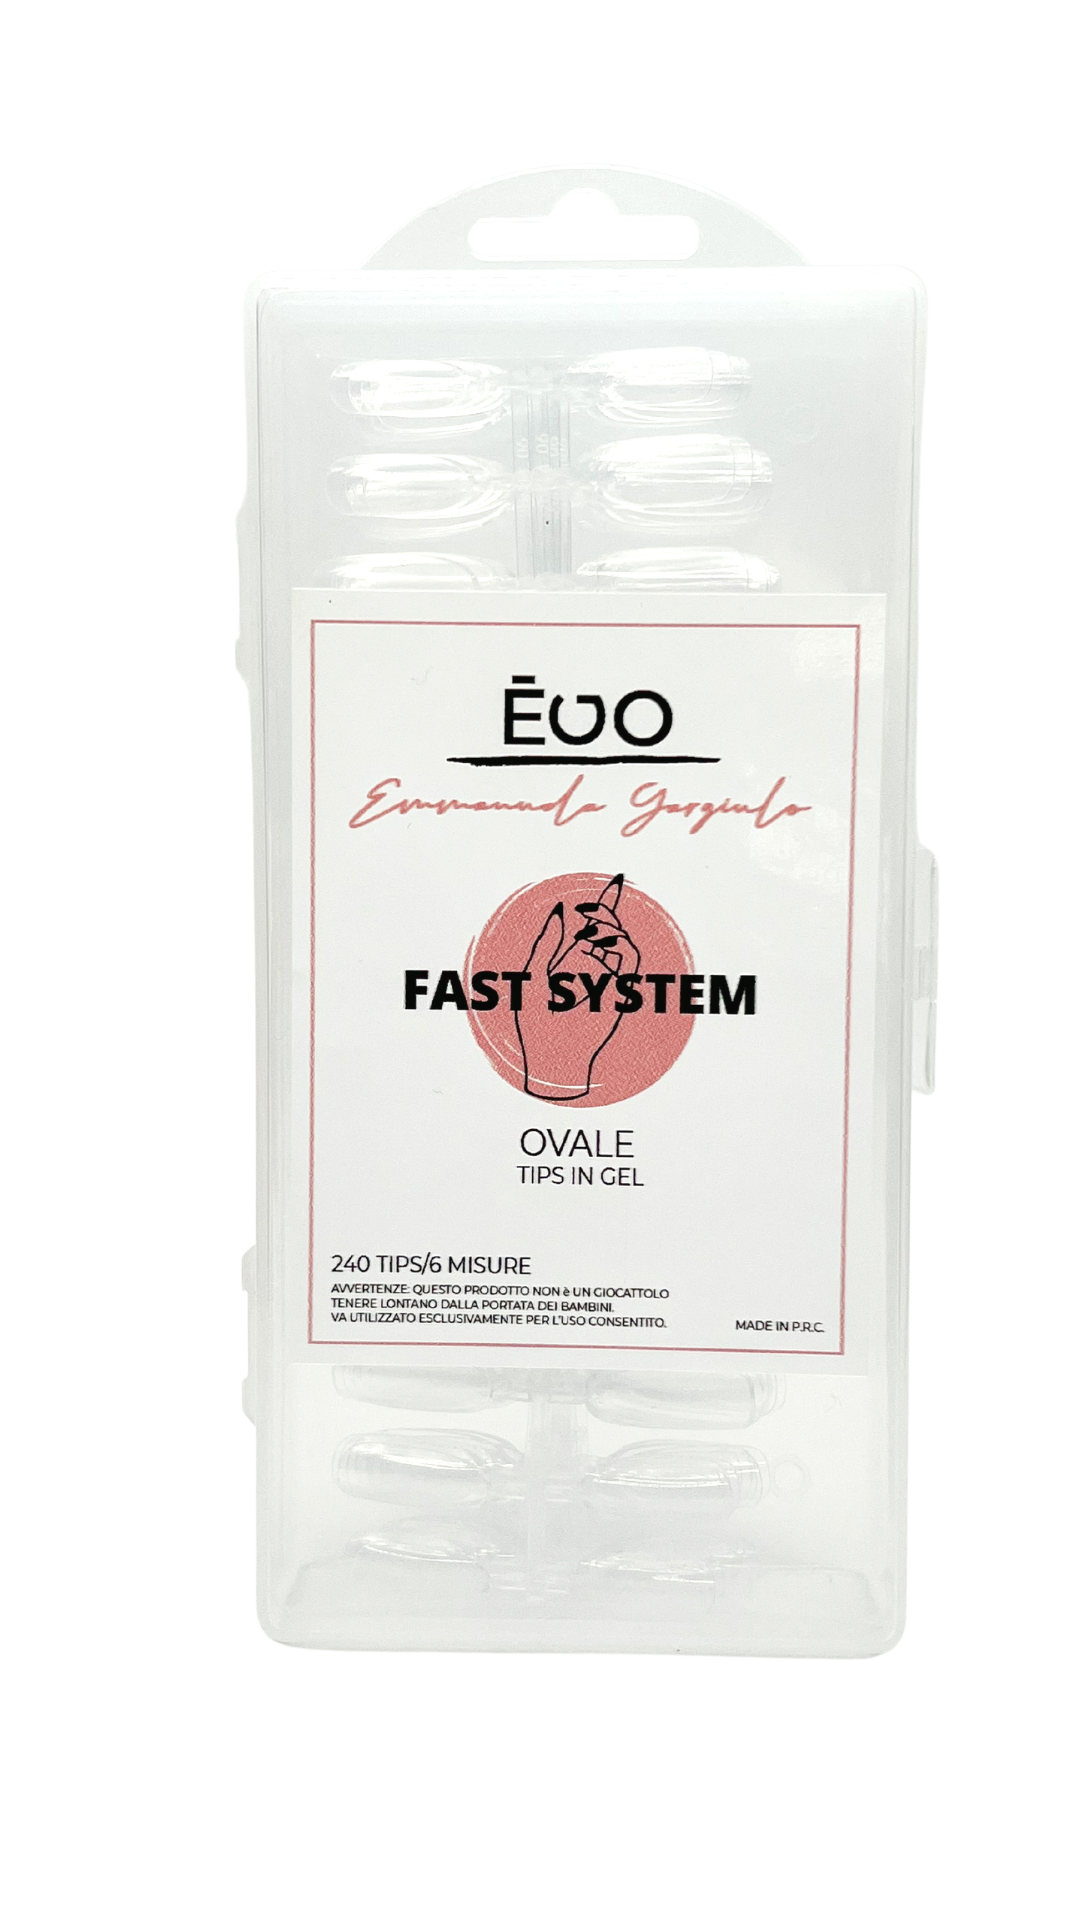 FAST SYSTEM OVALE